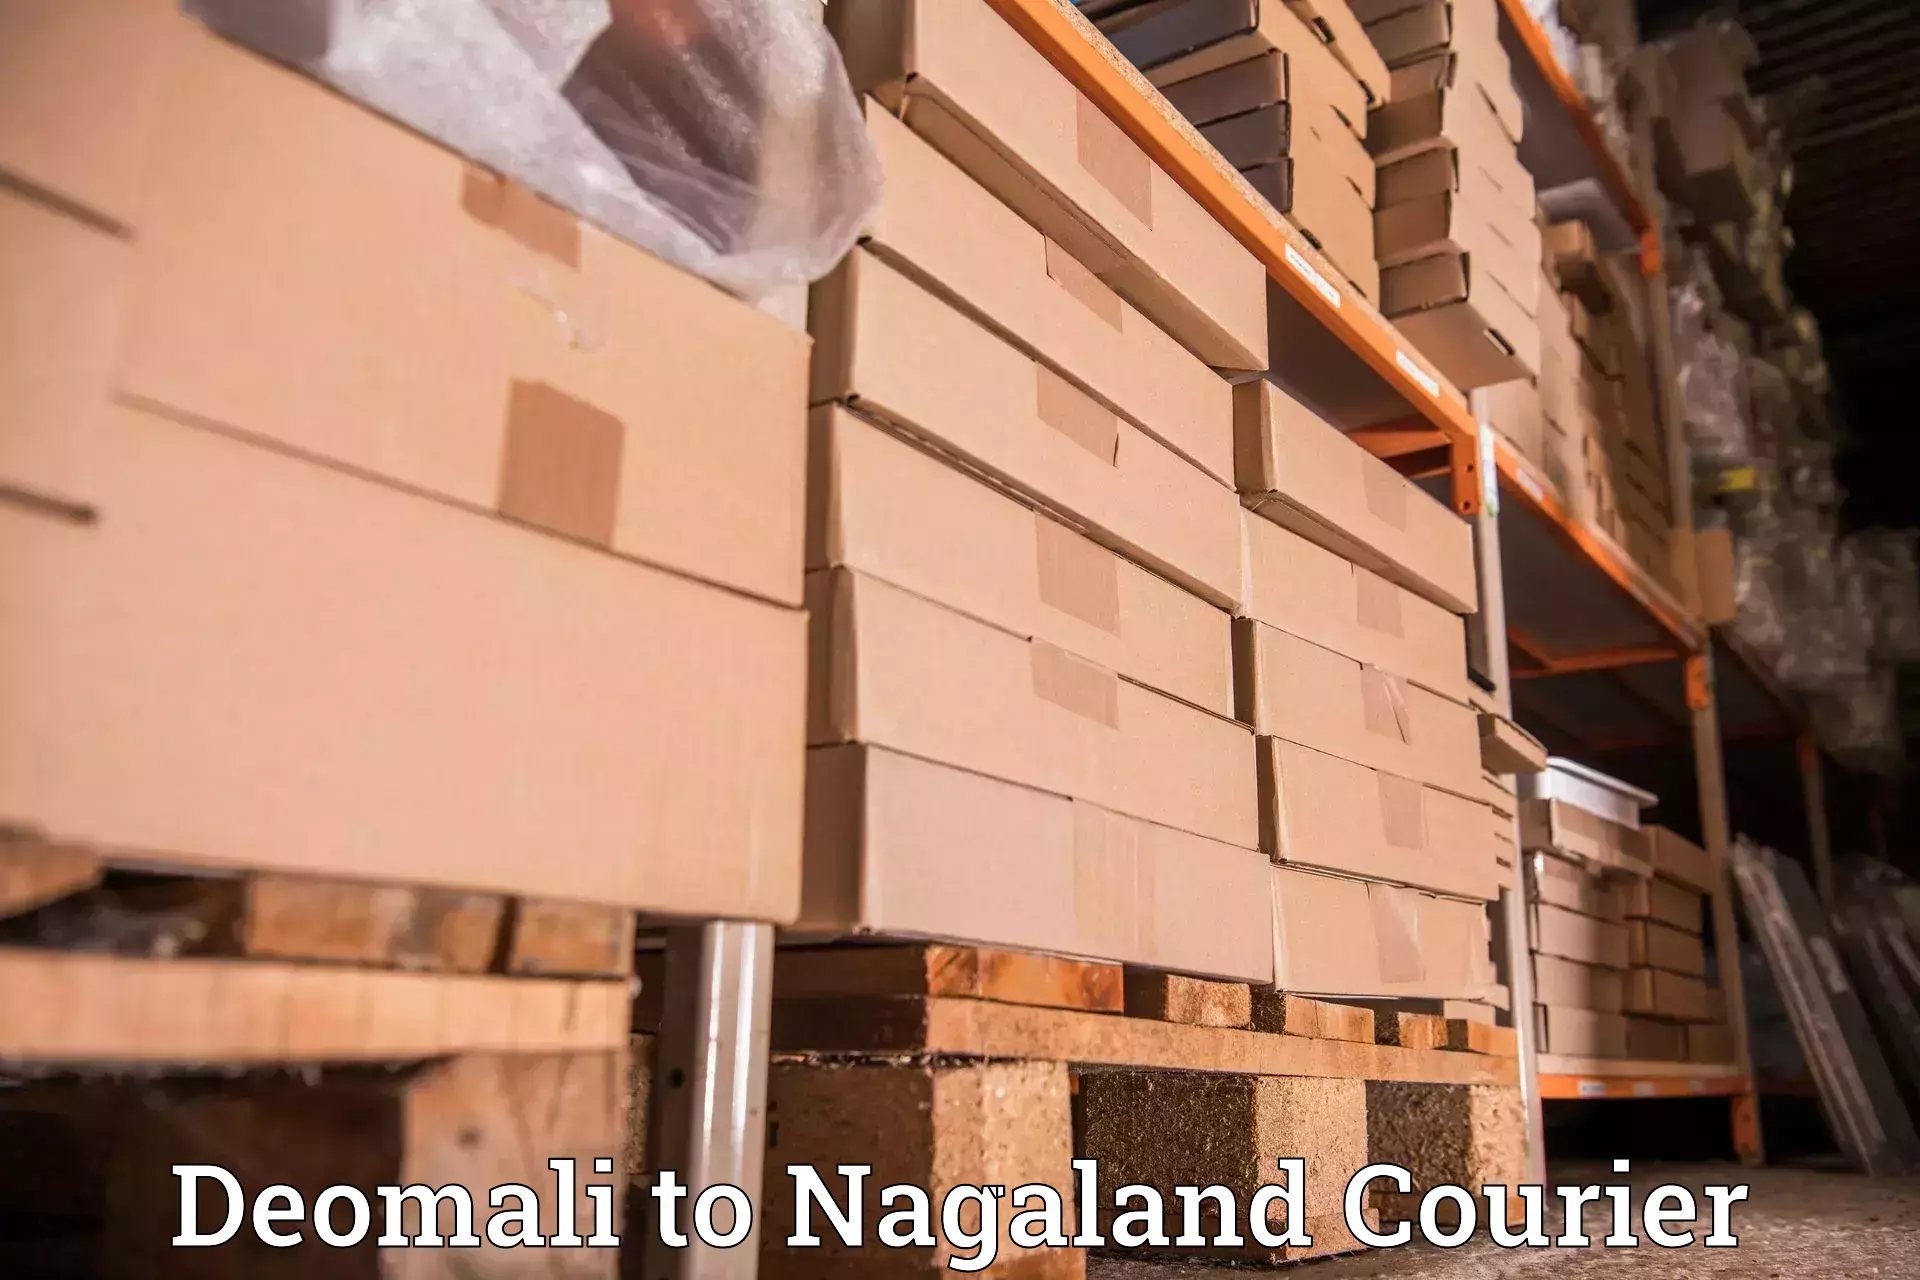 Customer-focused courier Deomali to Nagaland